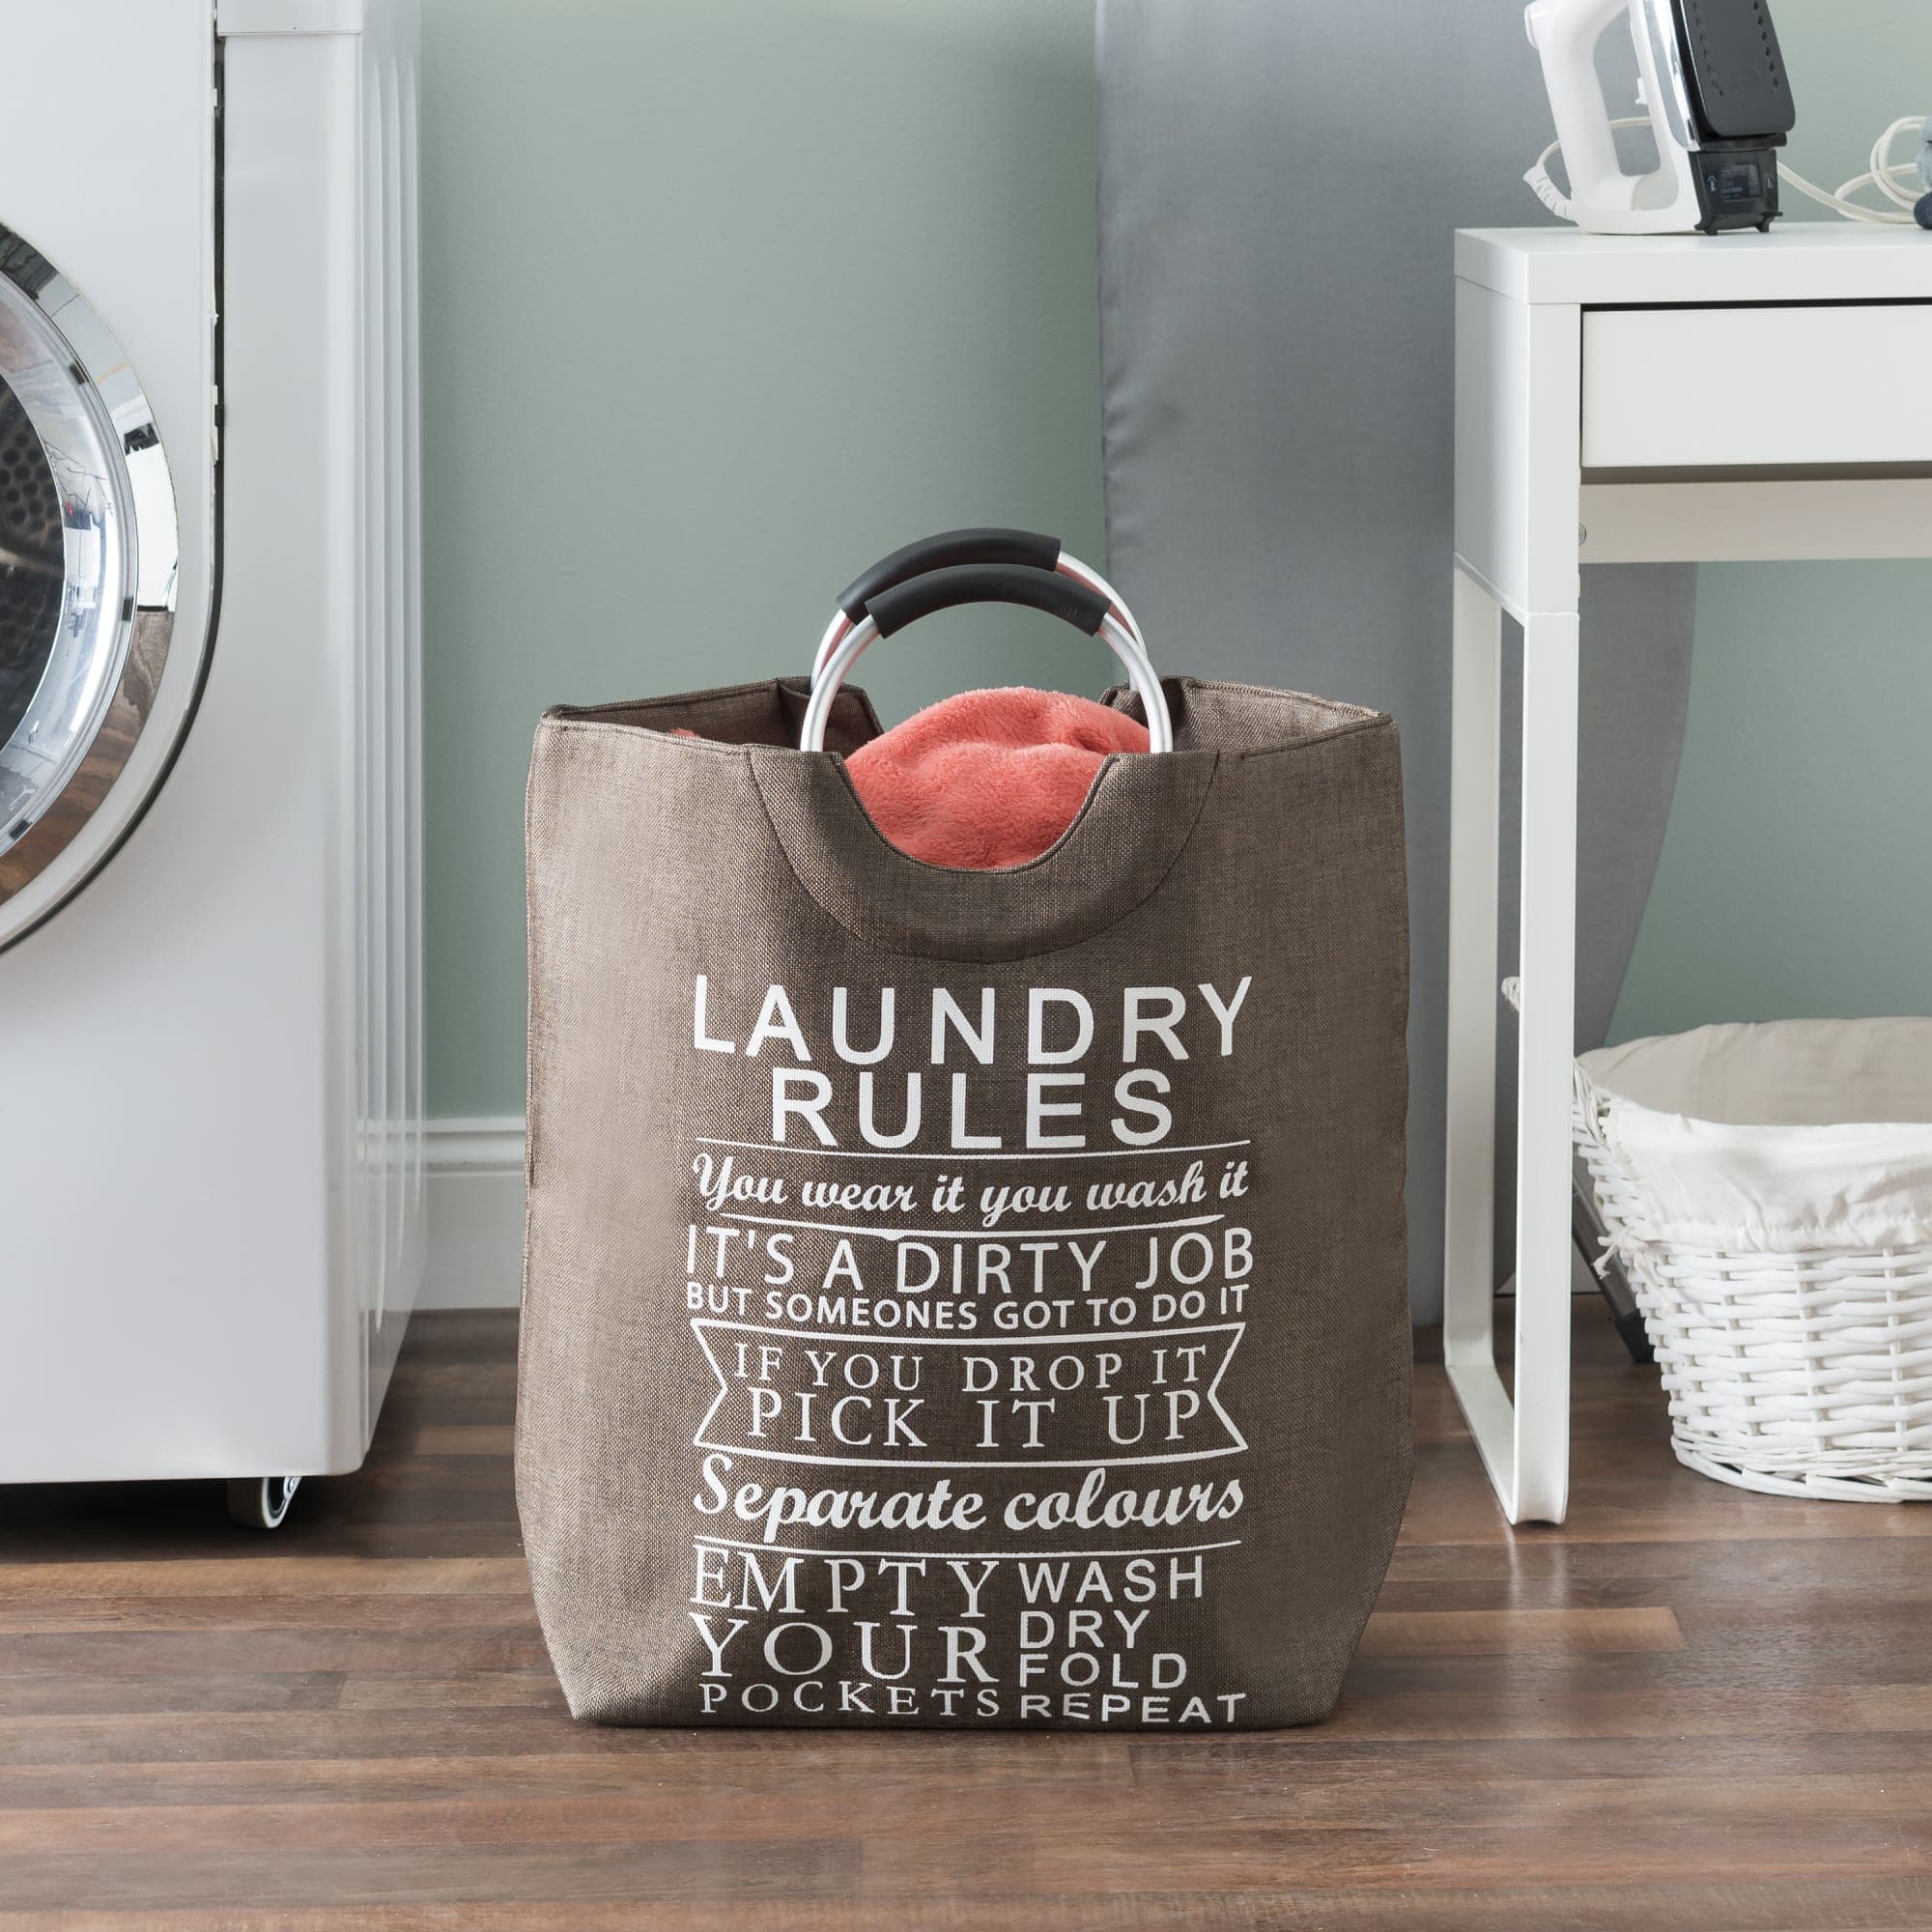 Home Basics Laundry Rules Canvas Hamper Tote with Soft Grip Handles, Brown, LAUNDRY ORGANIZATION